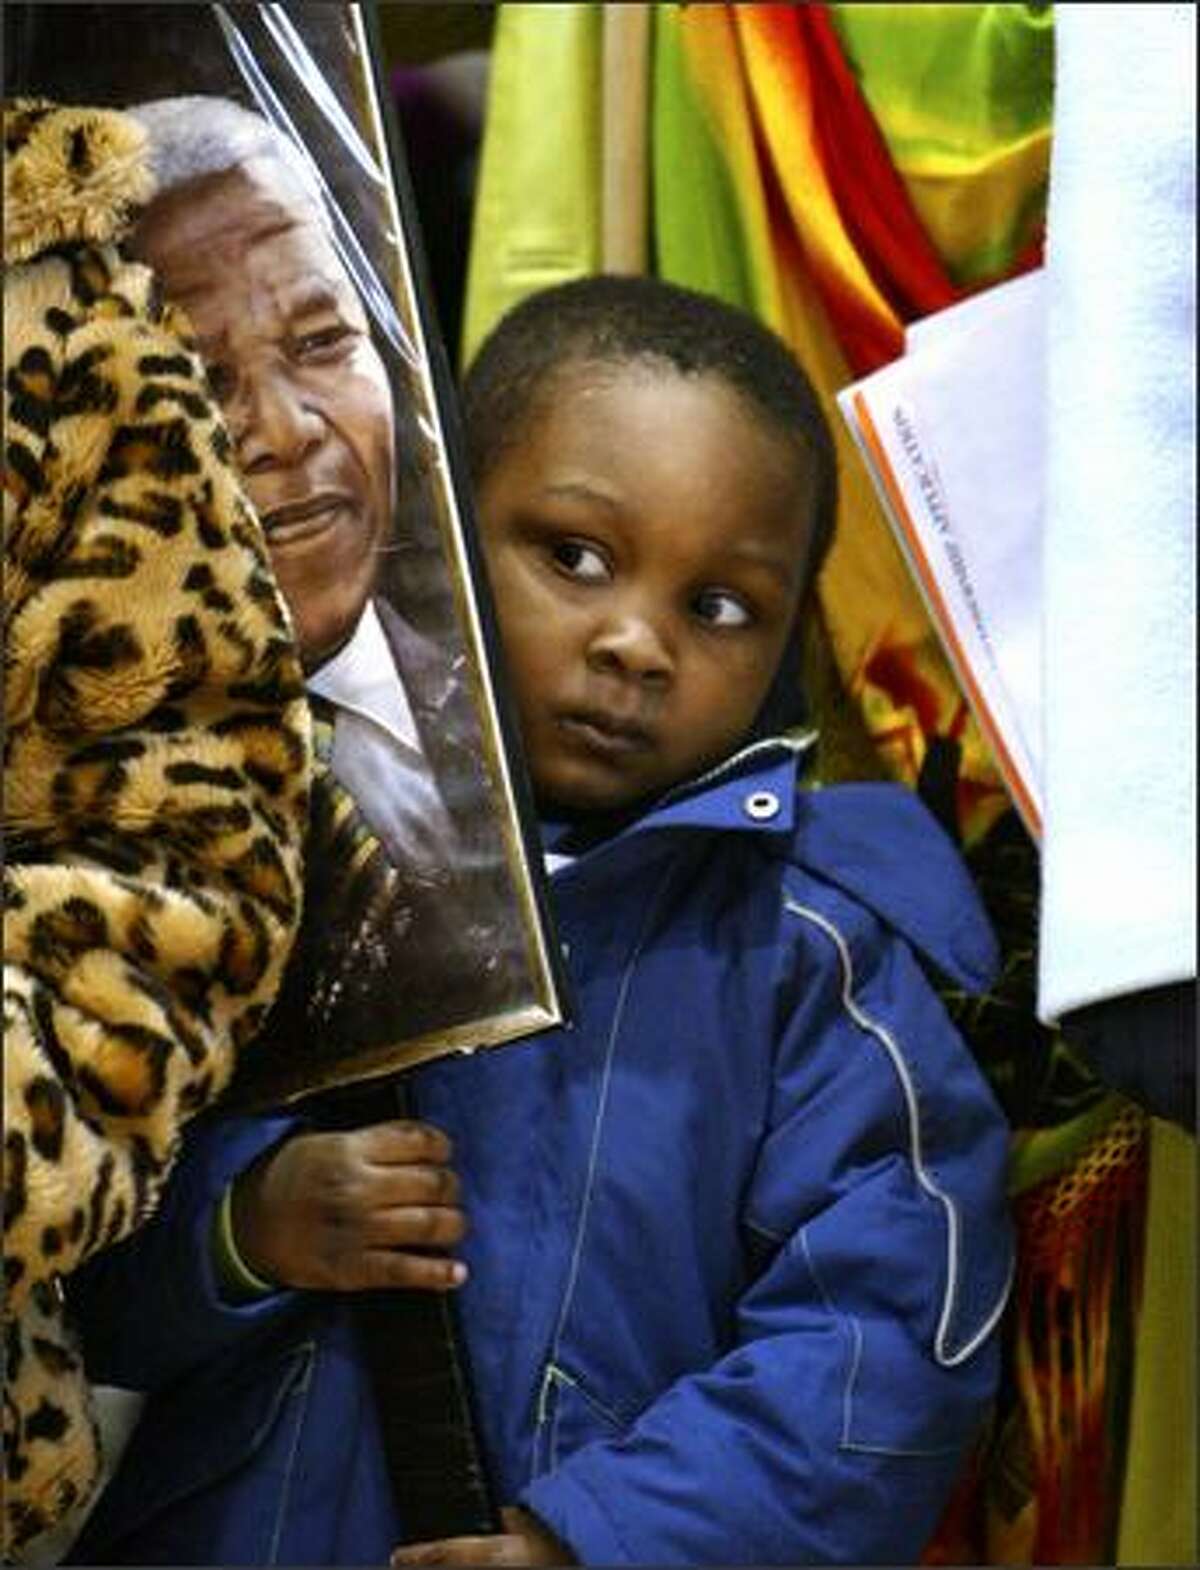 Davon Fuller holds a photo of Nelson Mandela as he squeezes in between his grandmother and older sister at the Franklin High School gym during the annual Martin Luther King Jr. Day celebration and march.Arias: Davon was just one of the hundreds who attended and later participated in the three-mile march that started at the high school and ended at Martin Luther King Jr. Park.